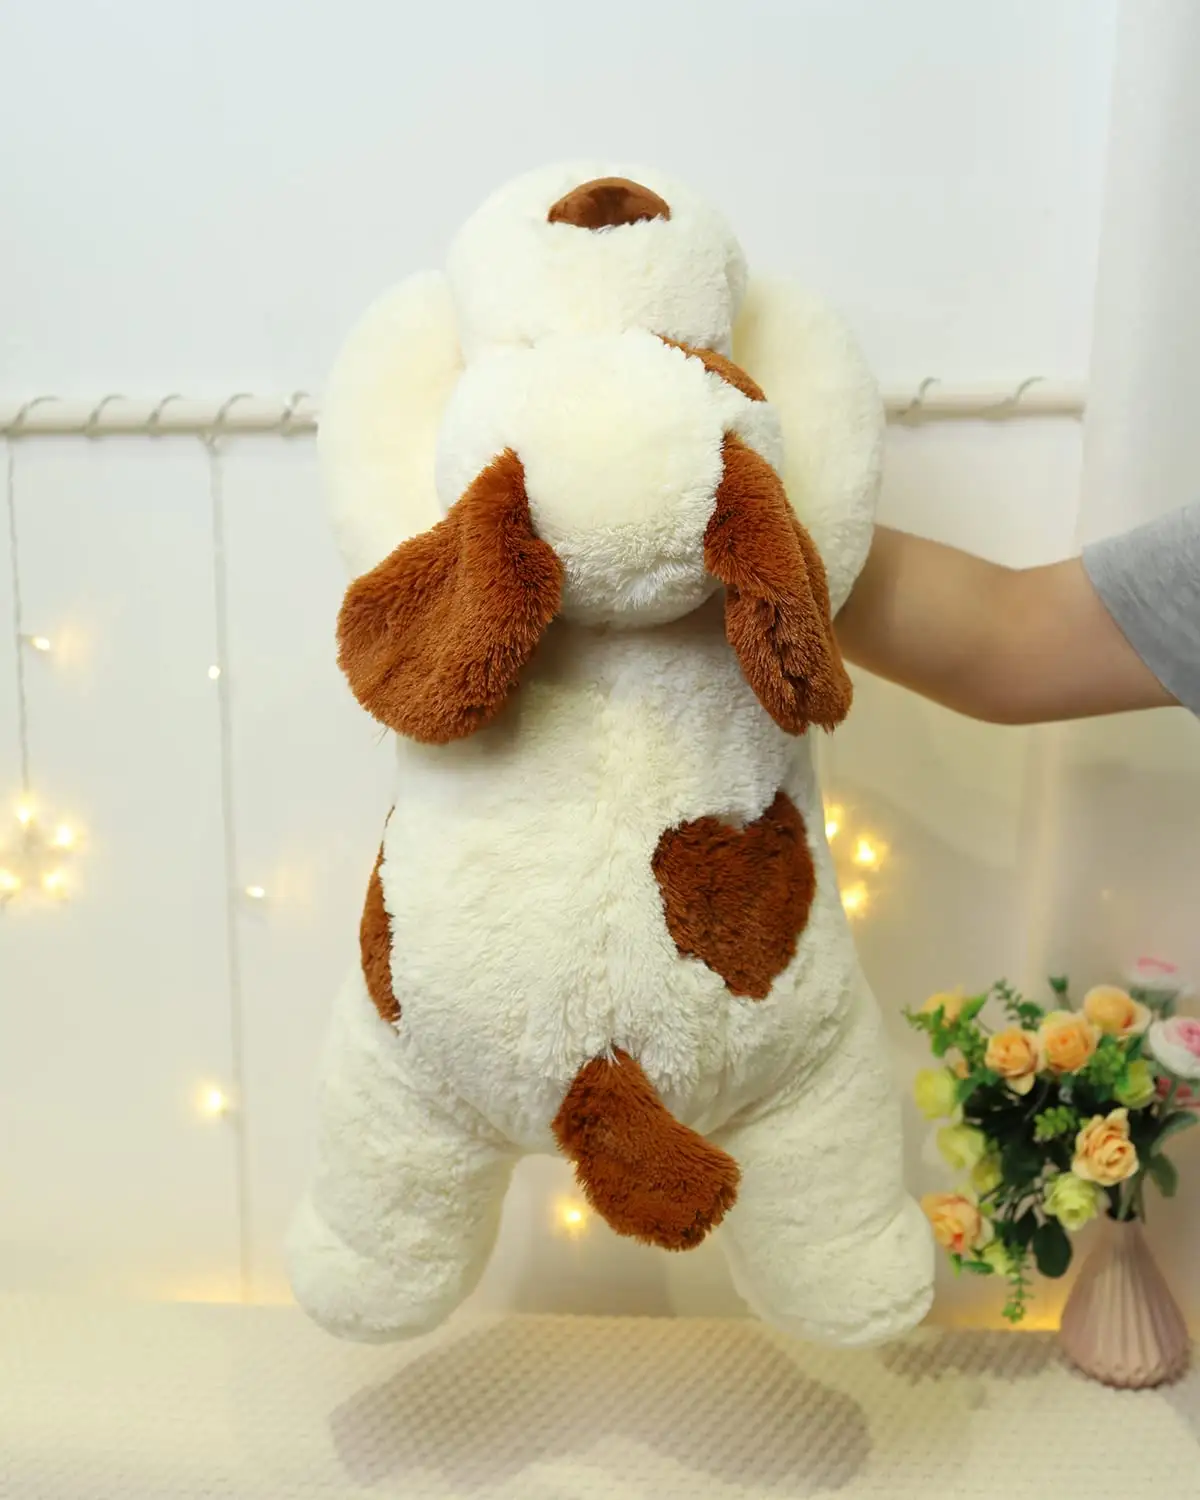 Stress Relief Cute Puppy Stuffed Animal Toys Soft Oversized Pillow Weighted Plush Stuffed Animals For Kids Adults Reducing Anxie